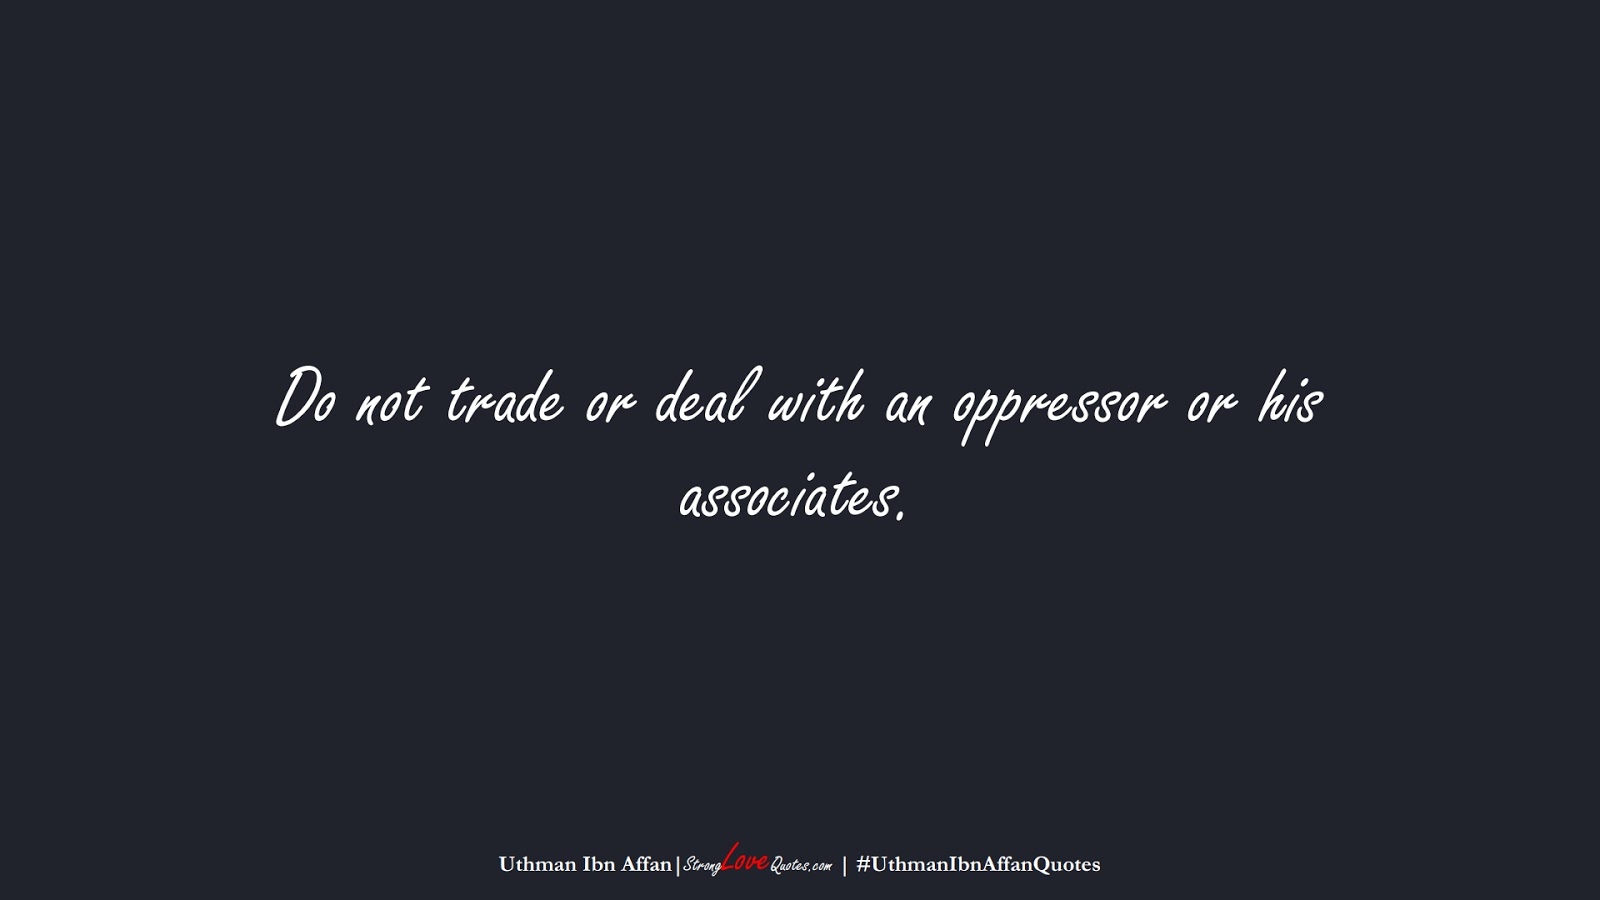 Do not trade or deal with an oppressor or his associates. (Uthman Ibn Affan);  #UthmanIbnAffanQuotes